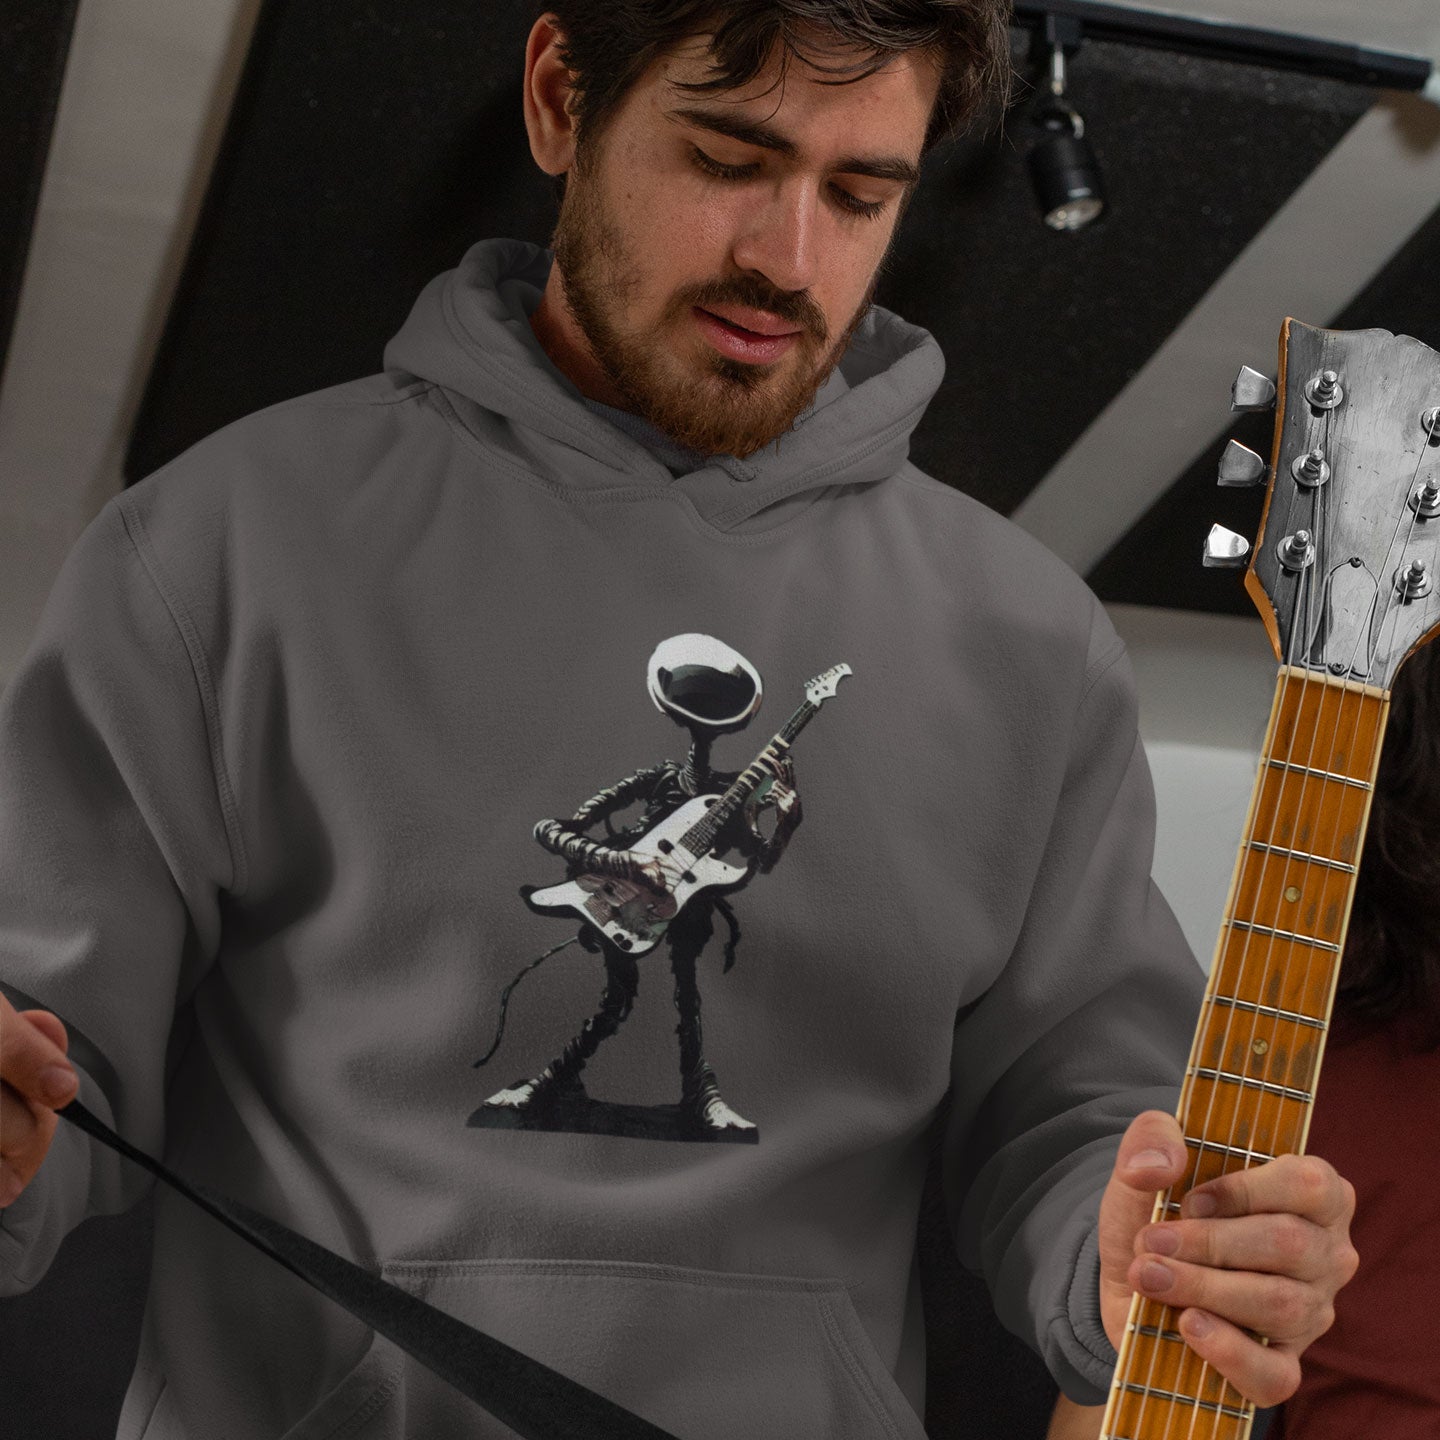 A guy holding a guitar wearing a grey hoodie with an alien guitarist print on the front